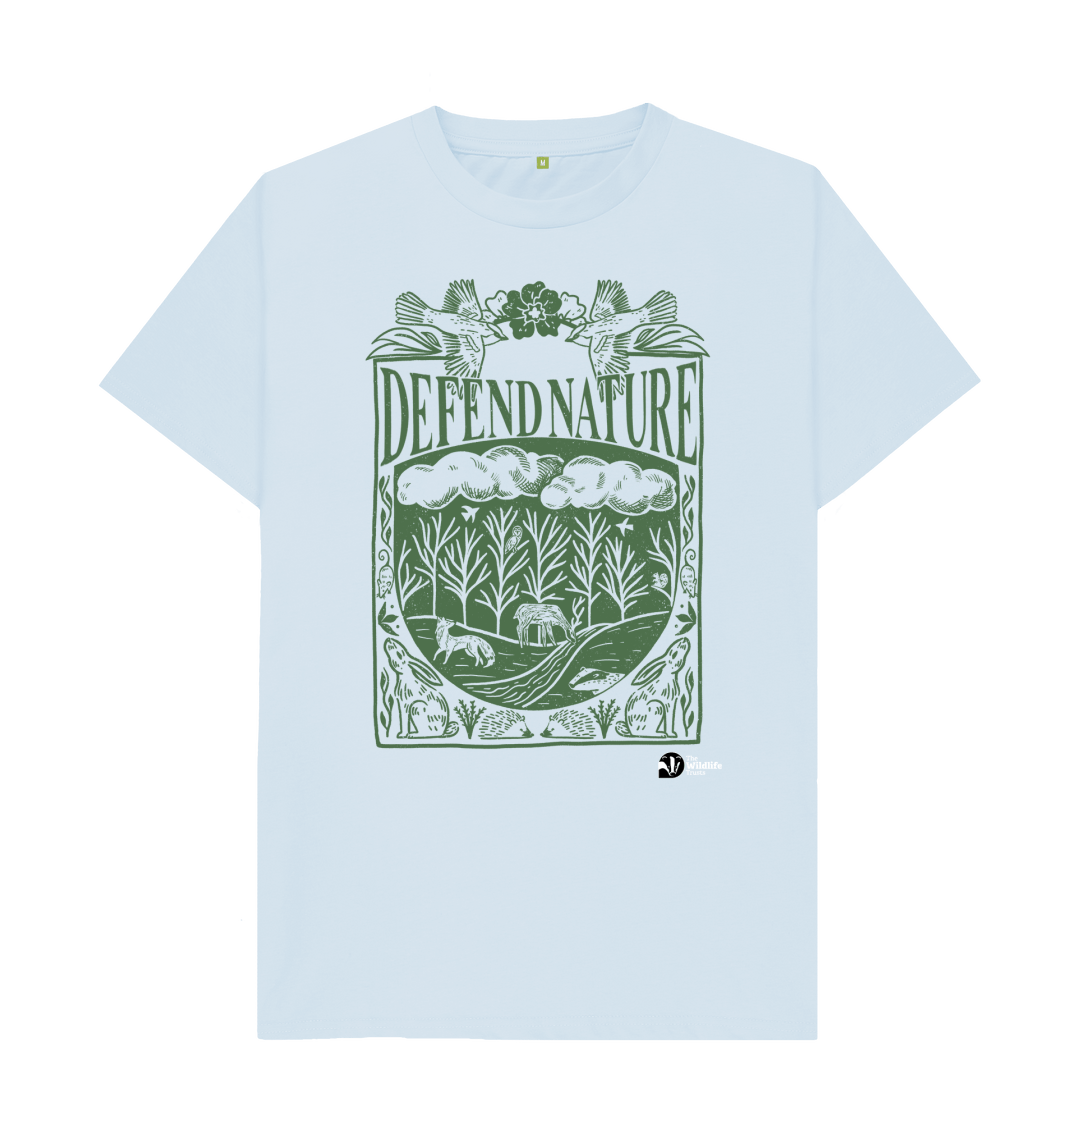 Defend Nature T-shirt | The Wildlife Trusts Store